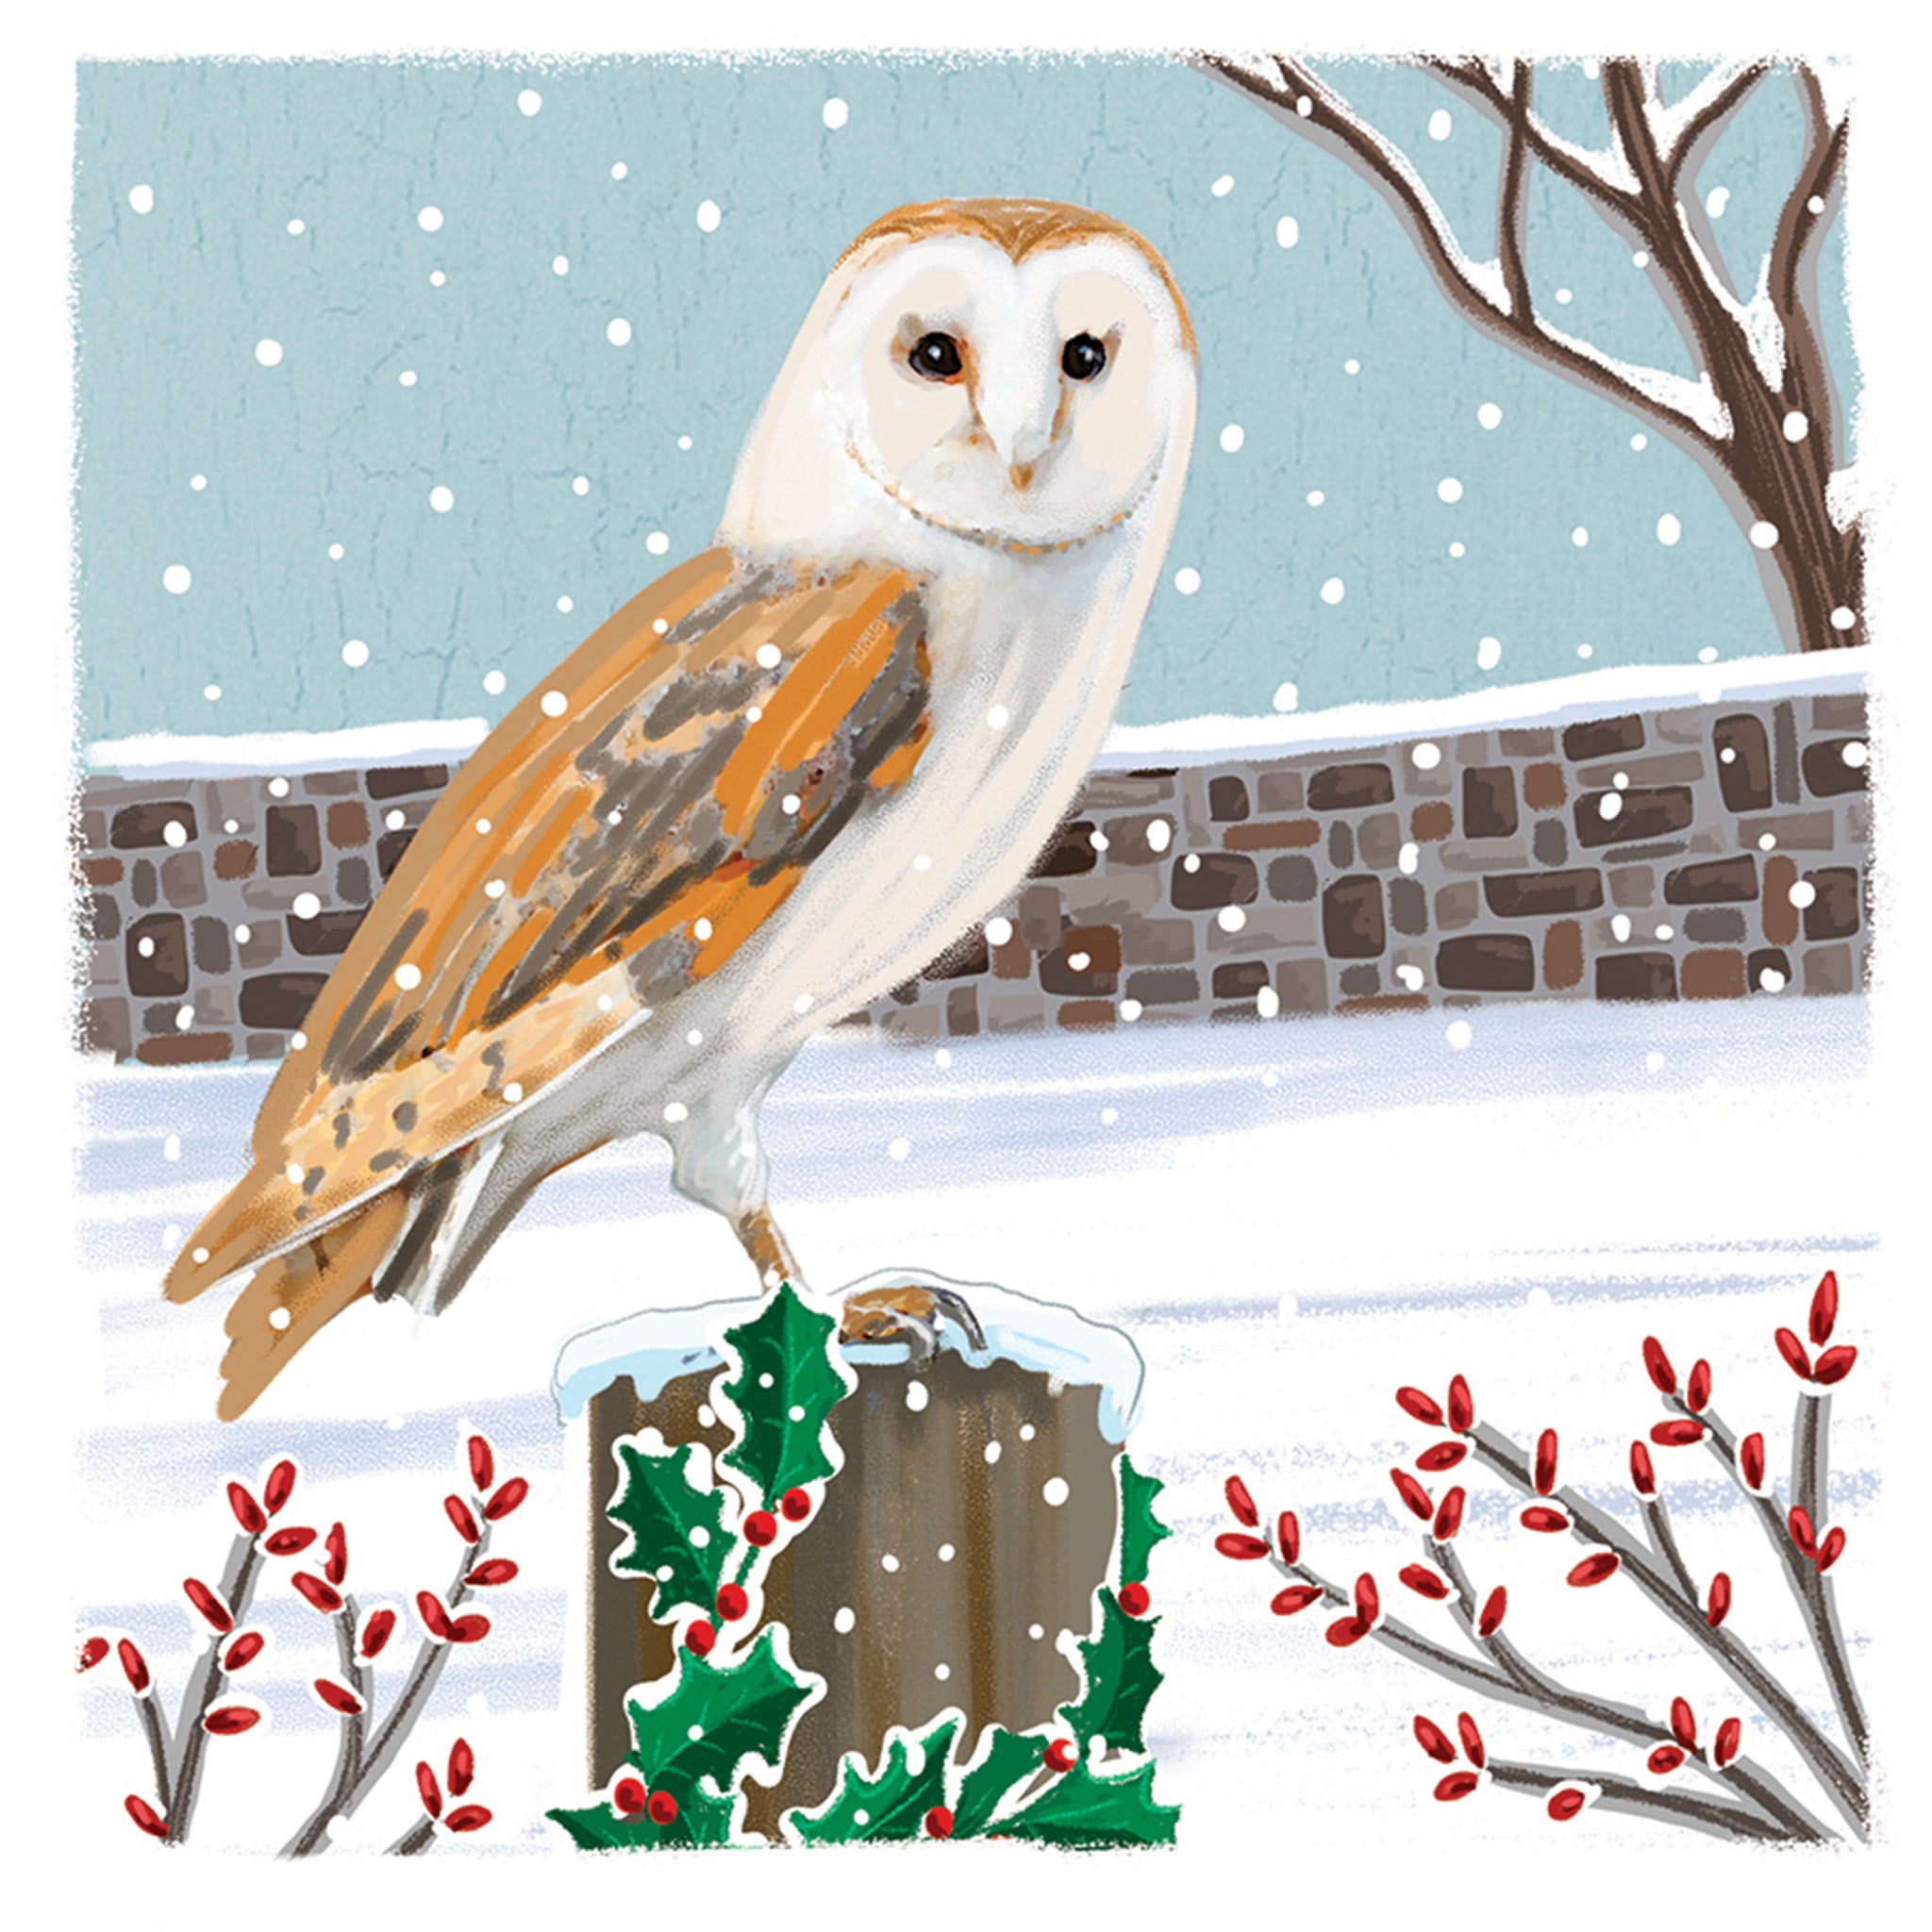 The design on this Christmas card is an illustration of a barn owl sitting on a fence in a snowy field.